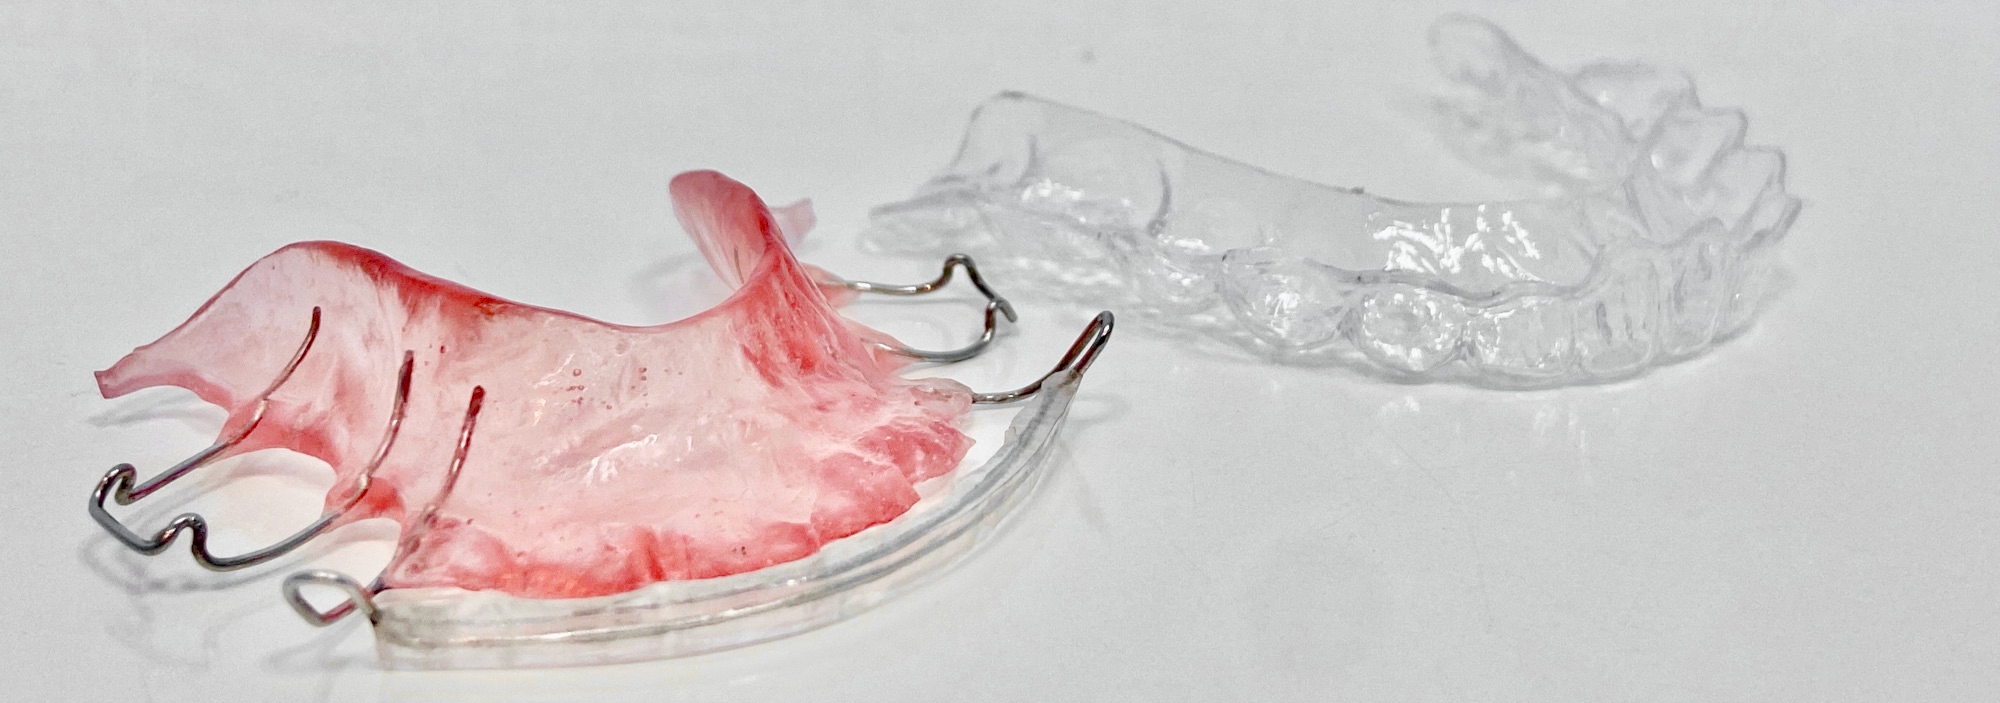 How to Clean Retainers: Removable and Permanent Retainers